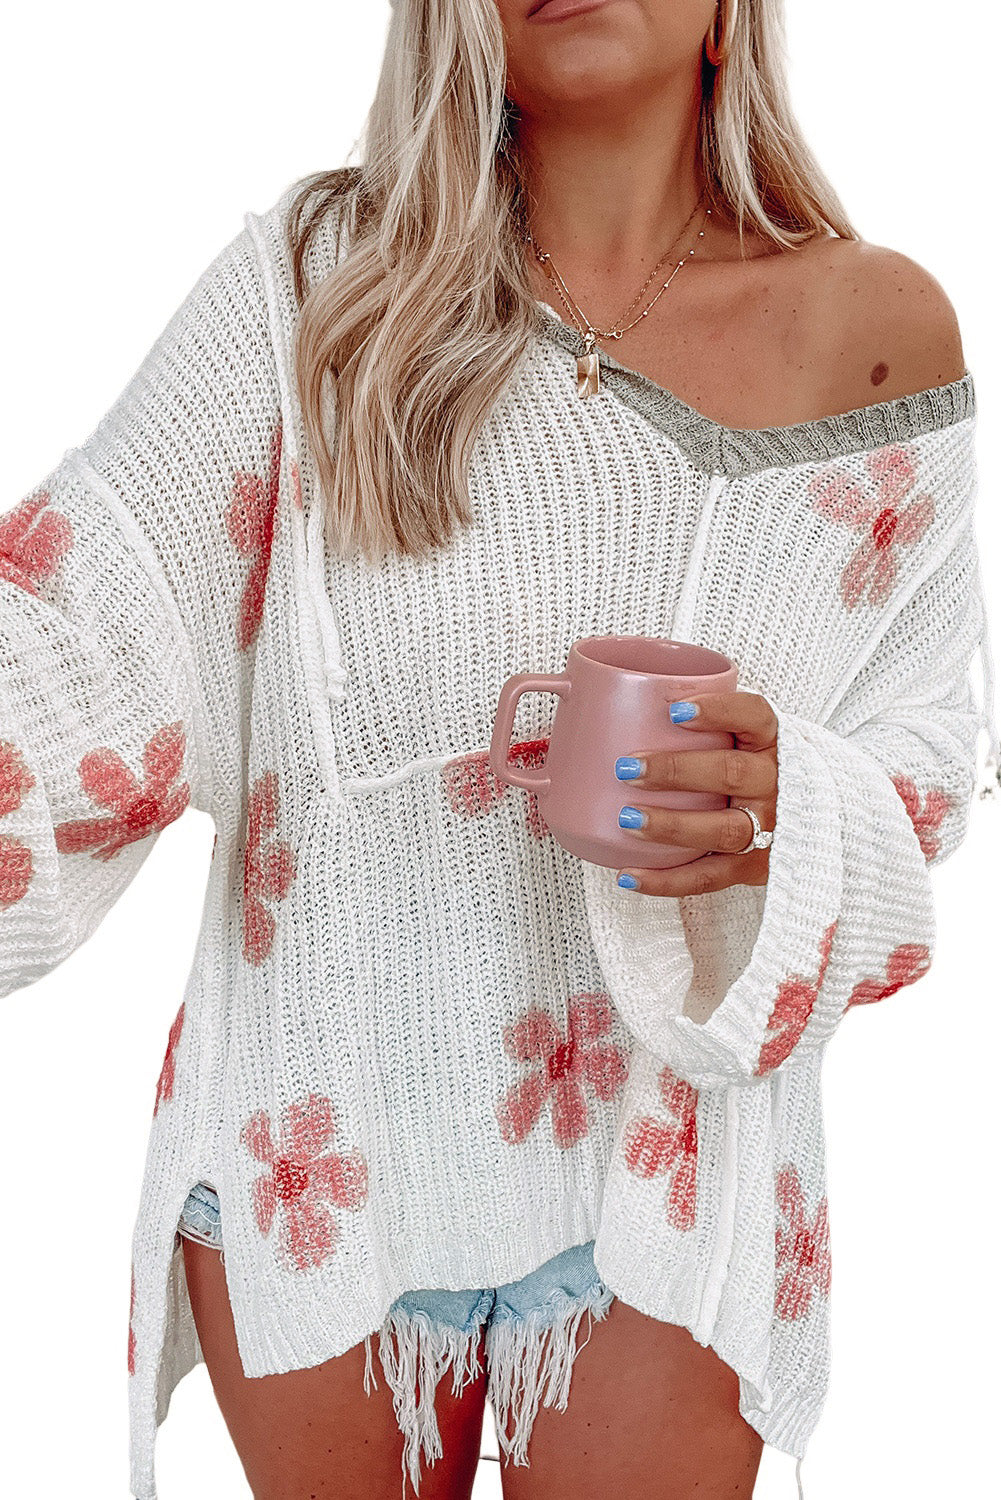 Floral Print Lightweight Knit Hooded Sweater - women's sweater at TFC&H Co.